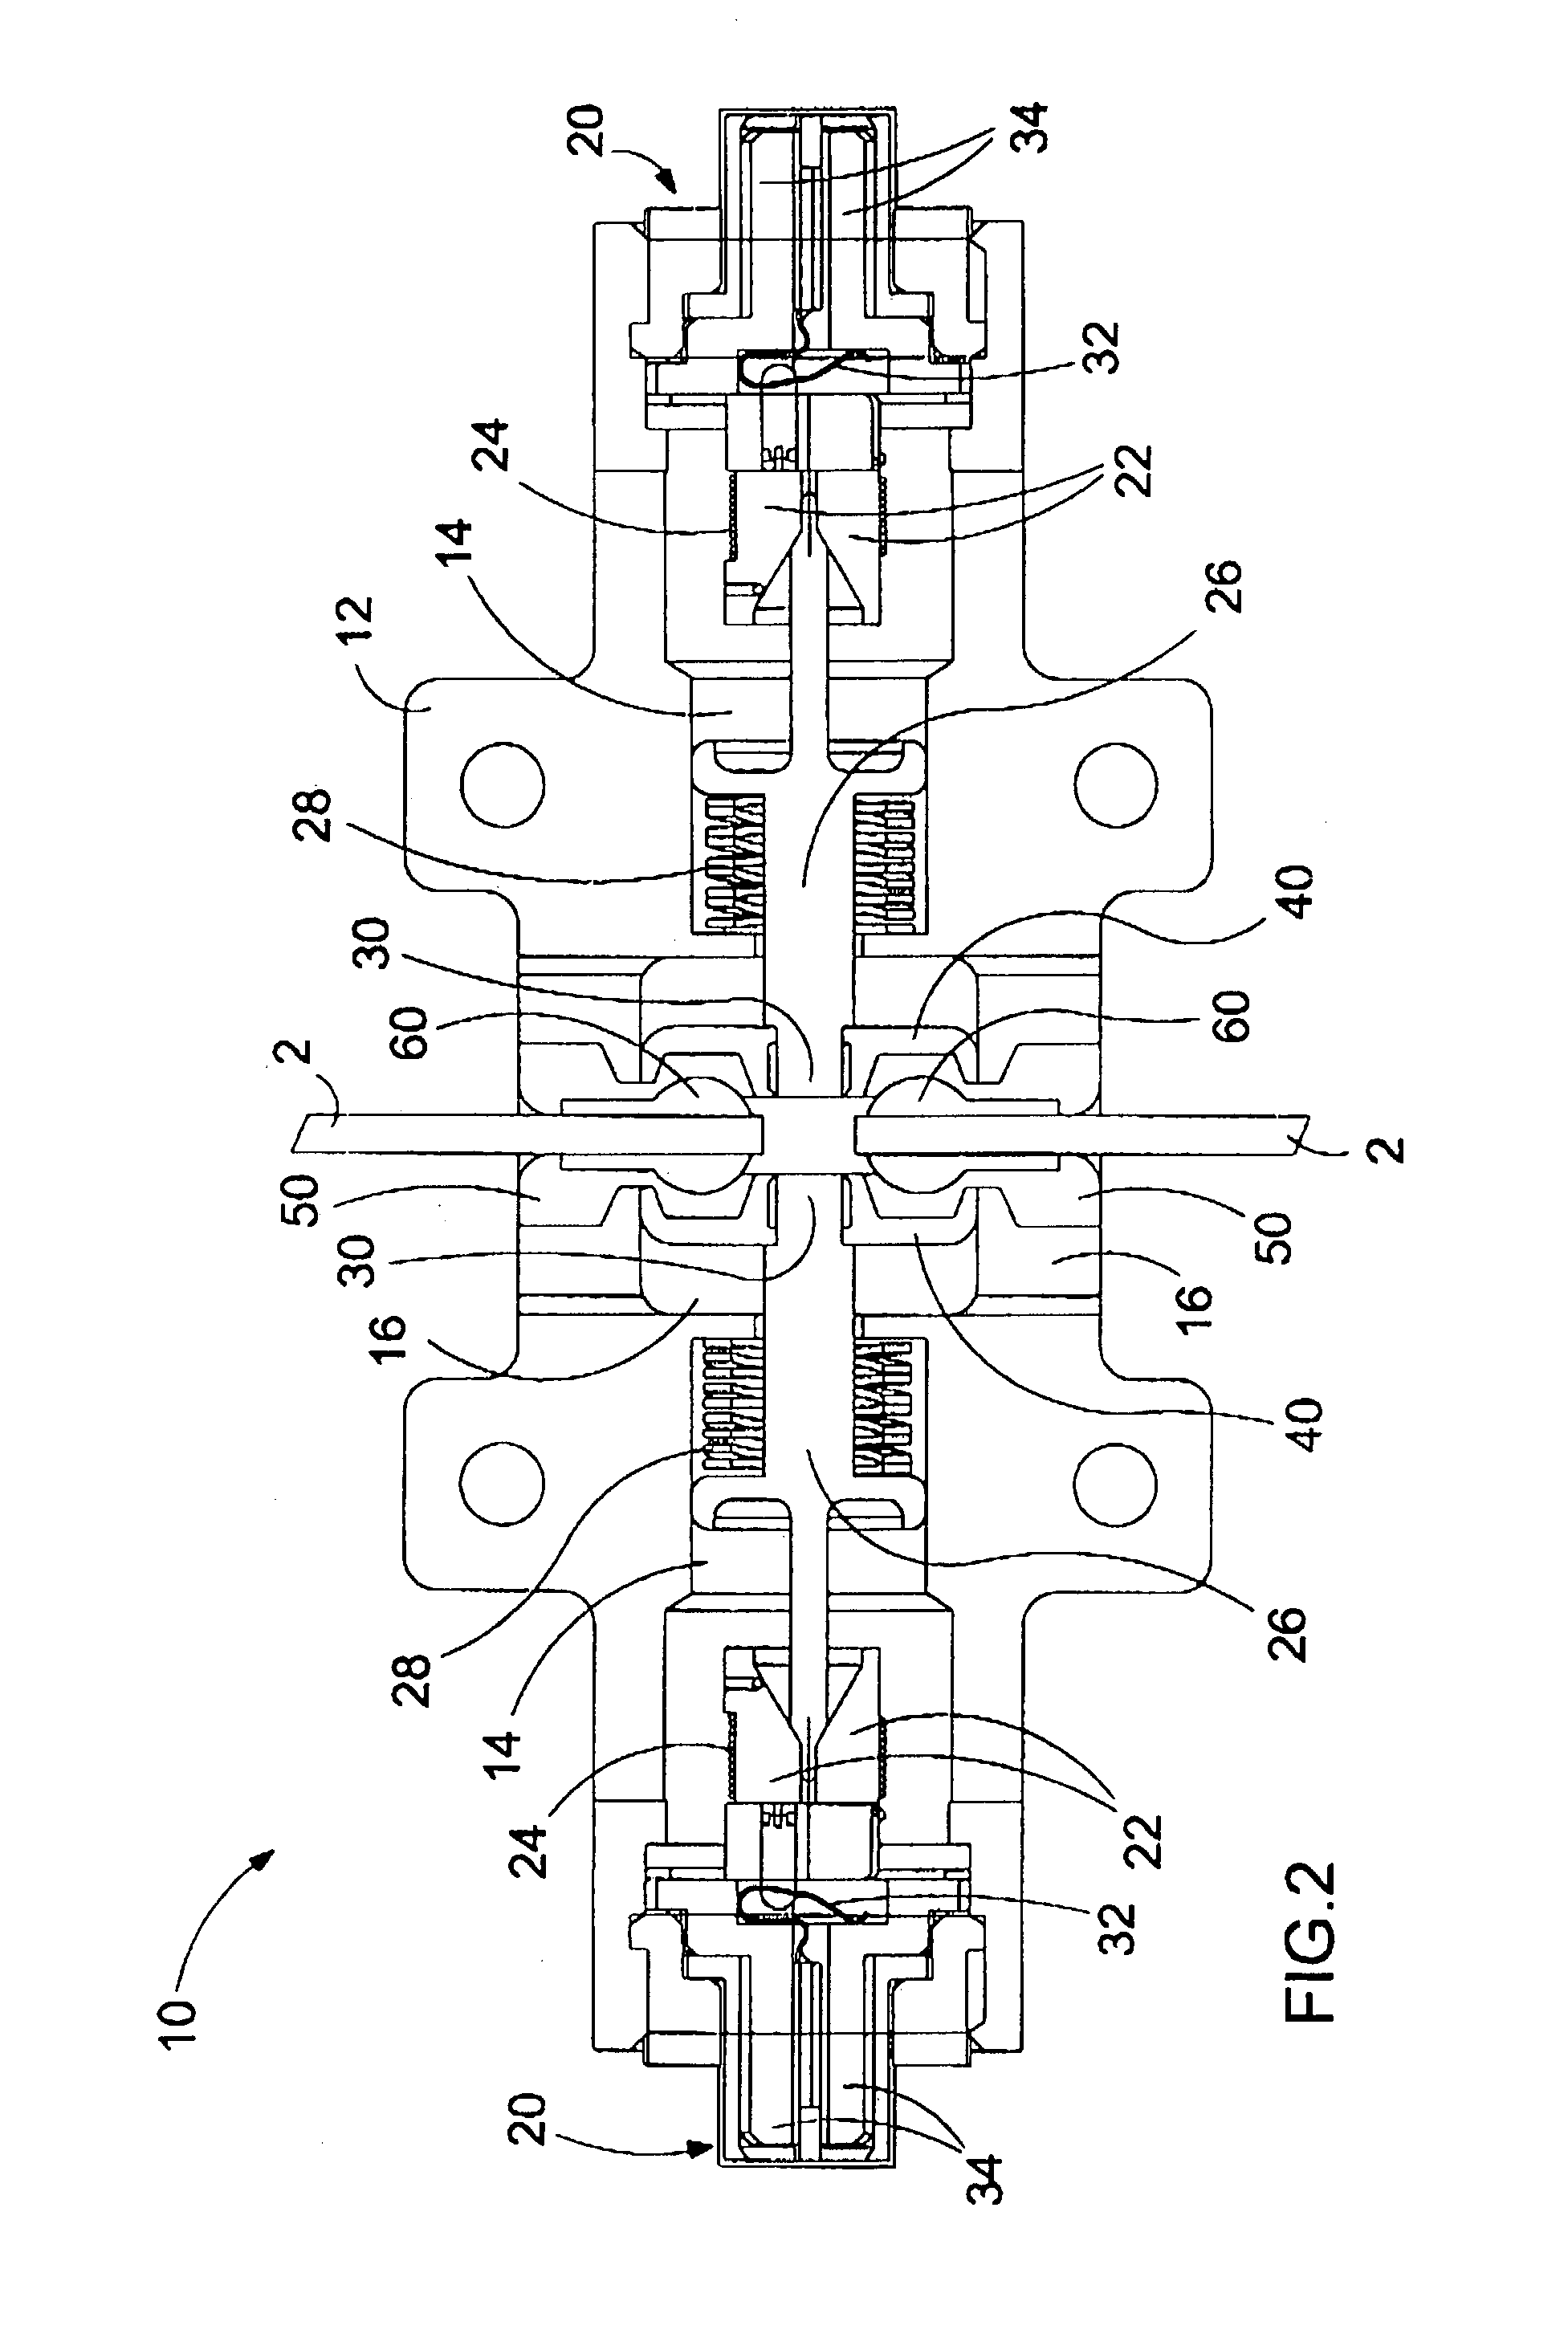 High-load capability non-explosive cable release mechanism